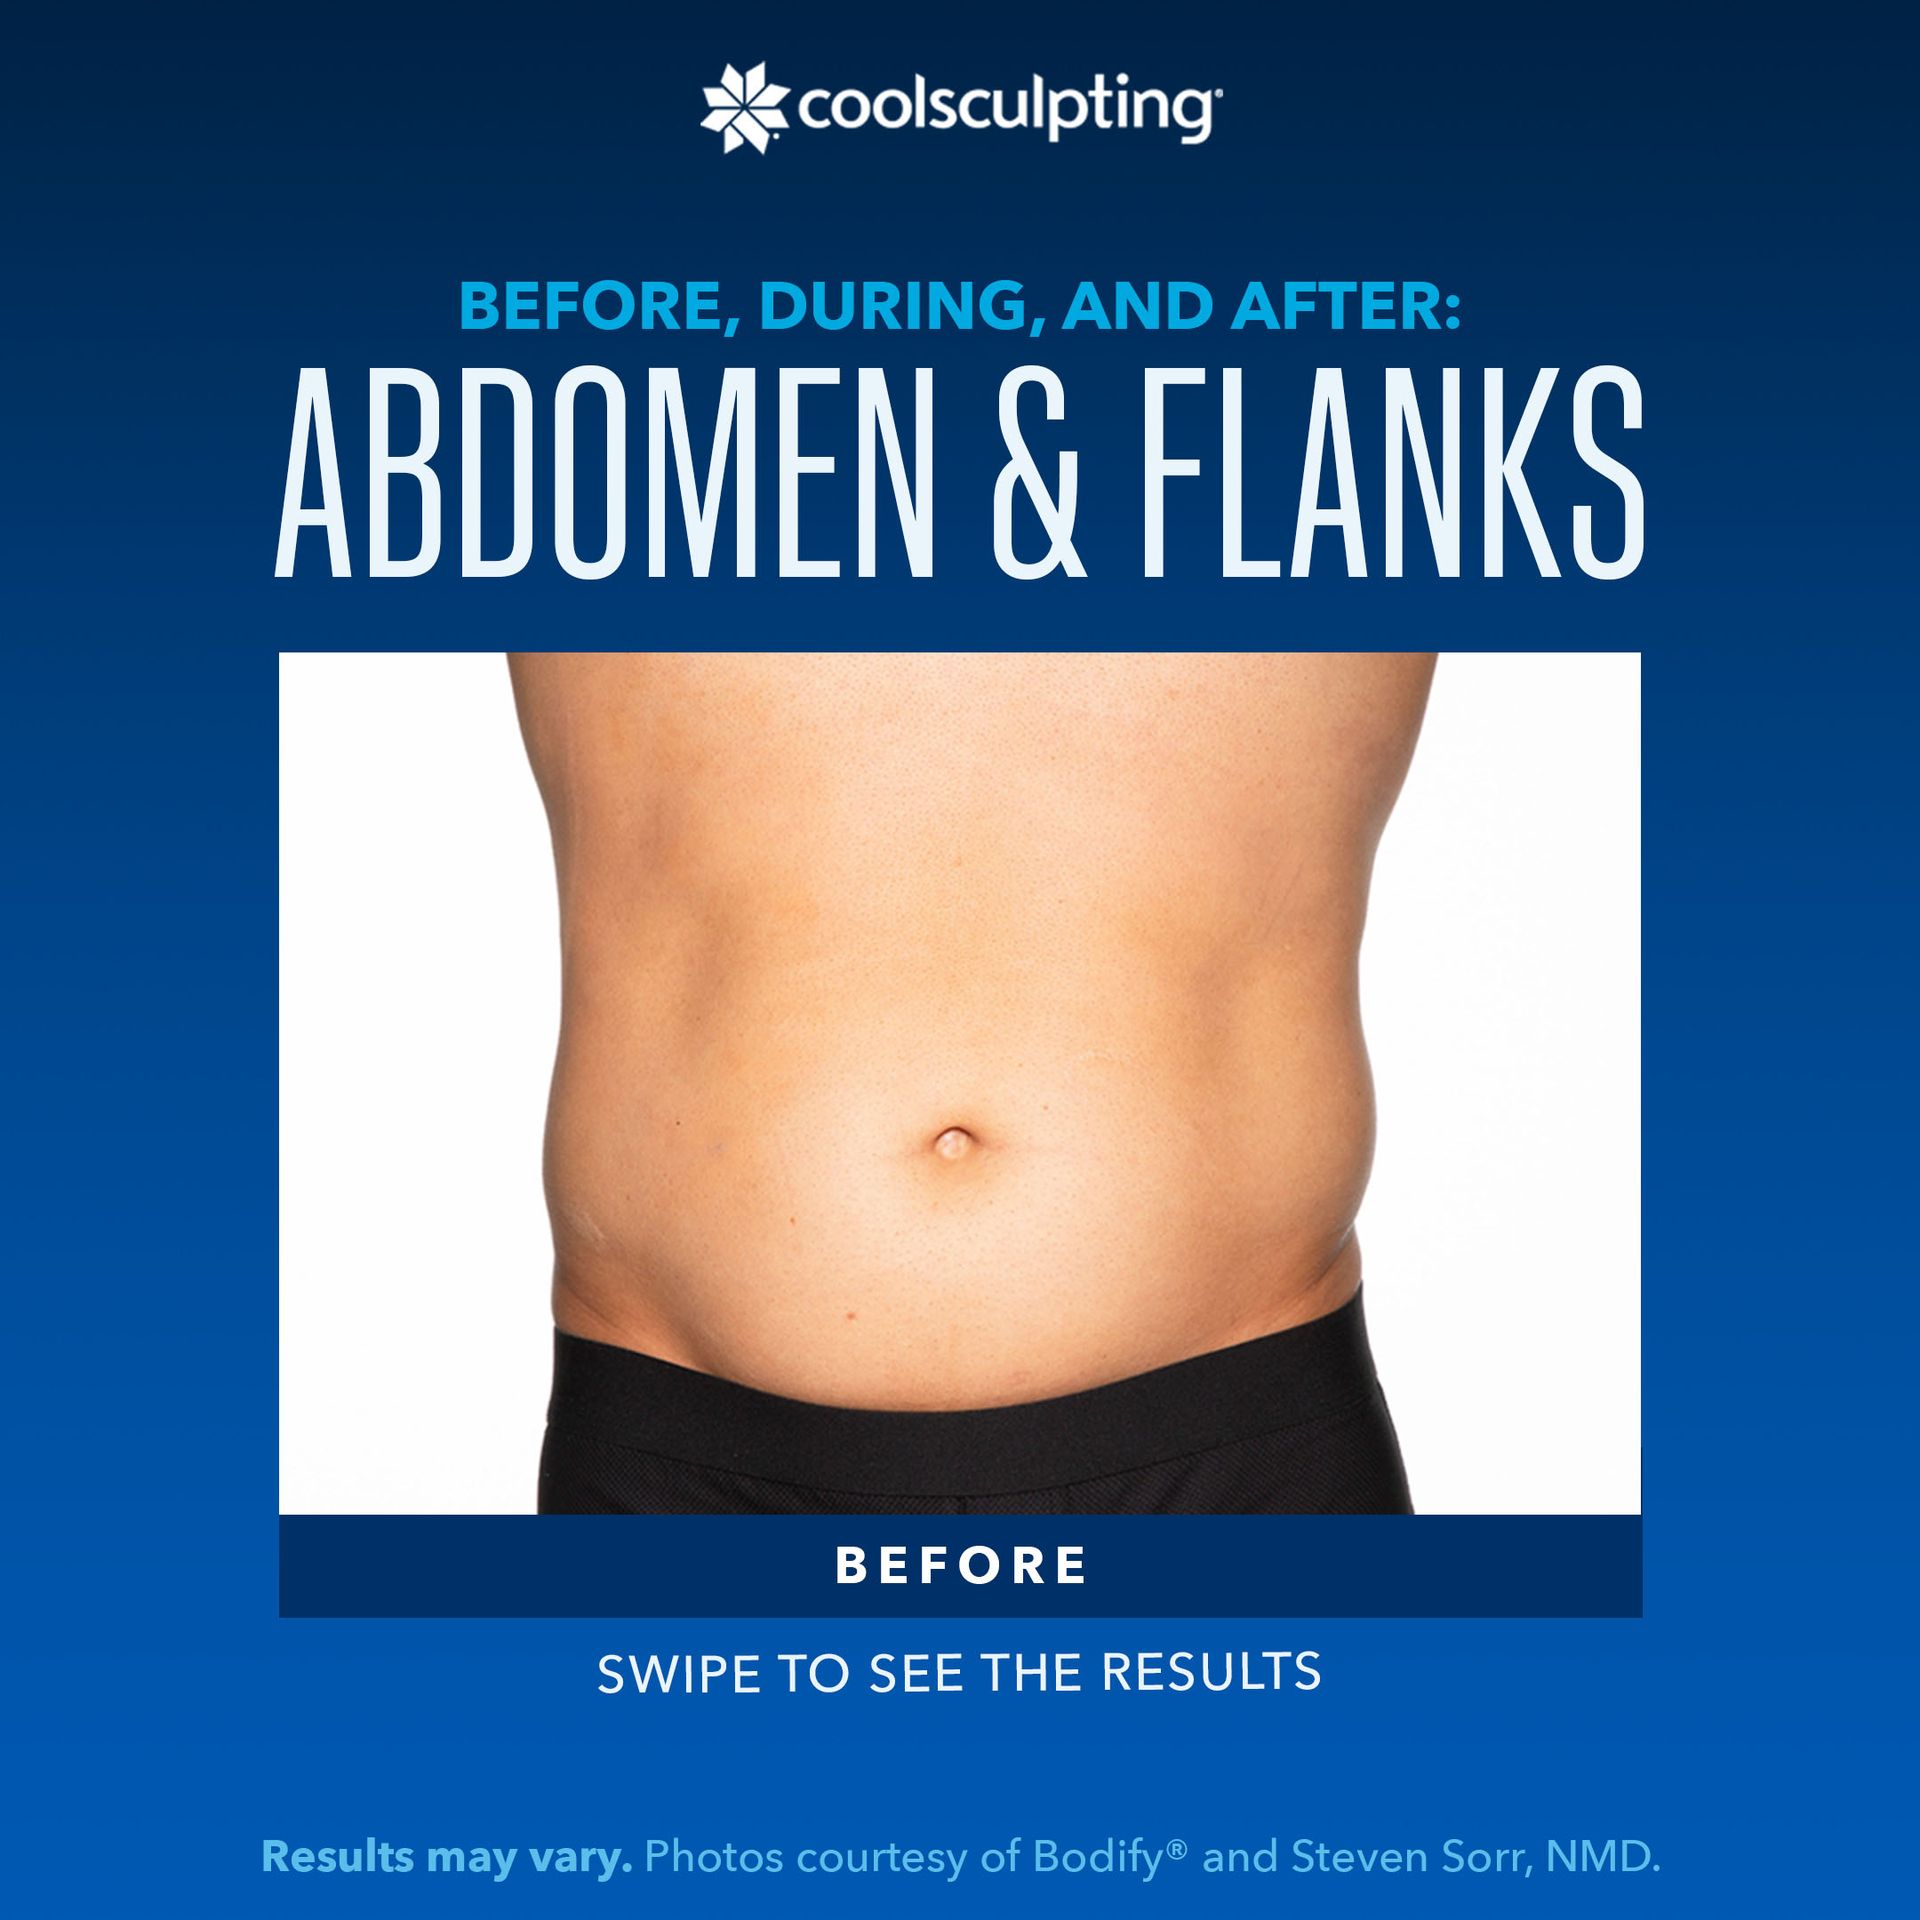 a before picture of a man's abdomen and flanks for coolsculpting treatment